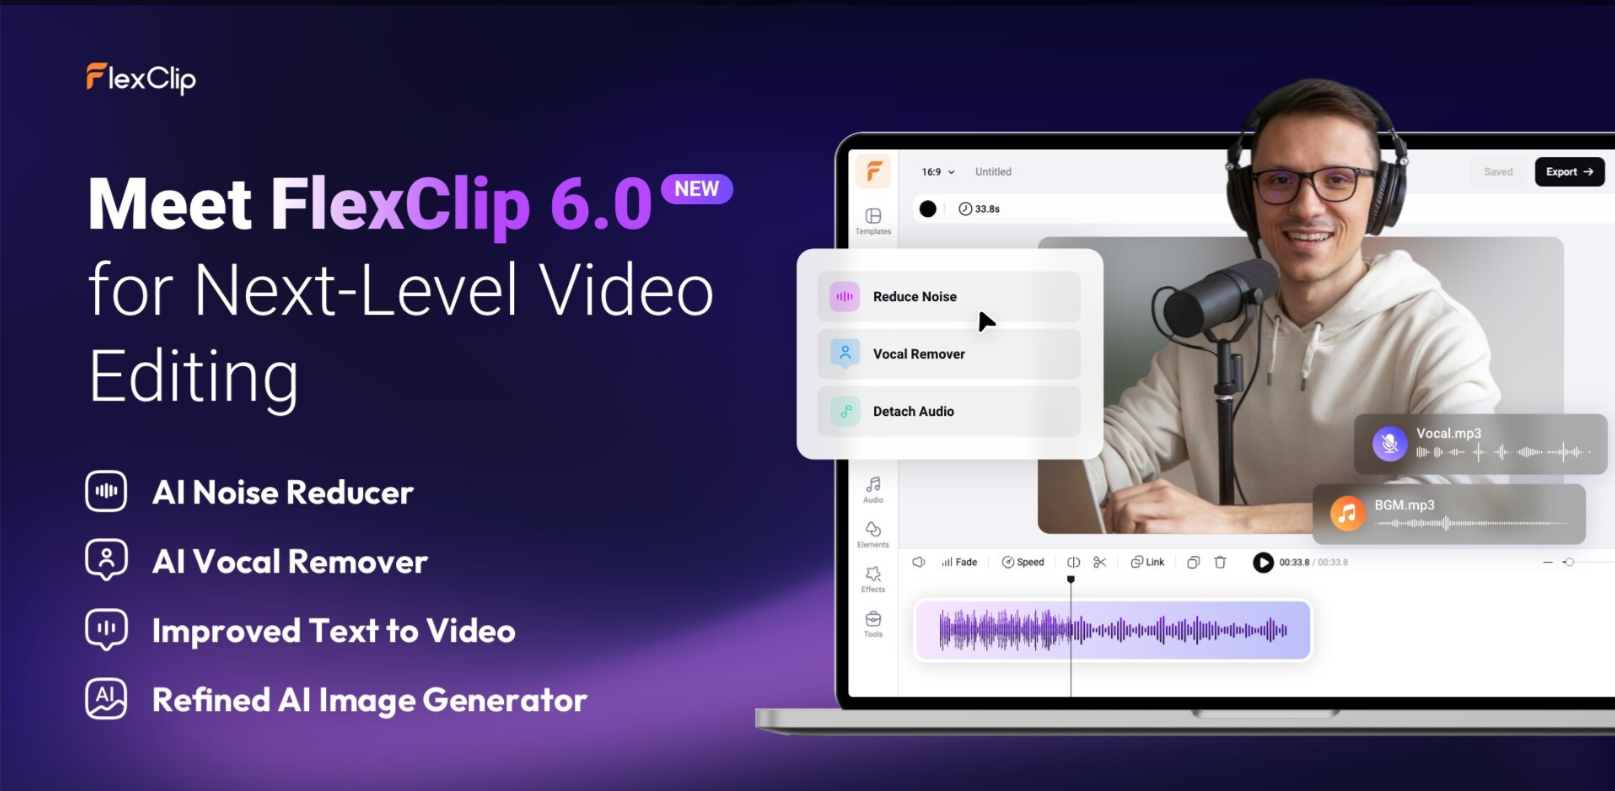 FlexClip 6.0: Revolutionizing Video Editing with Advanced AI and Audio Tools